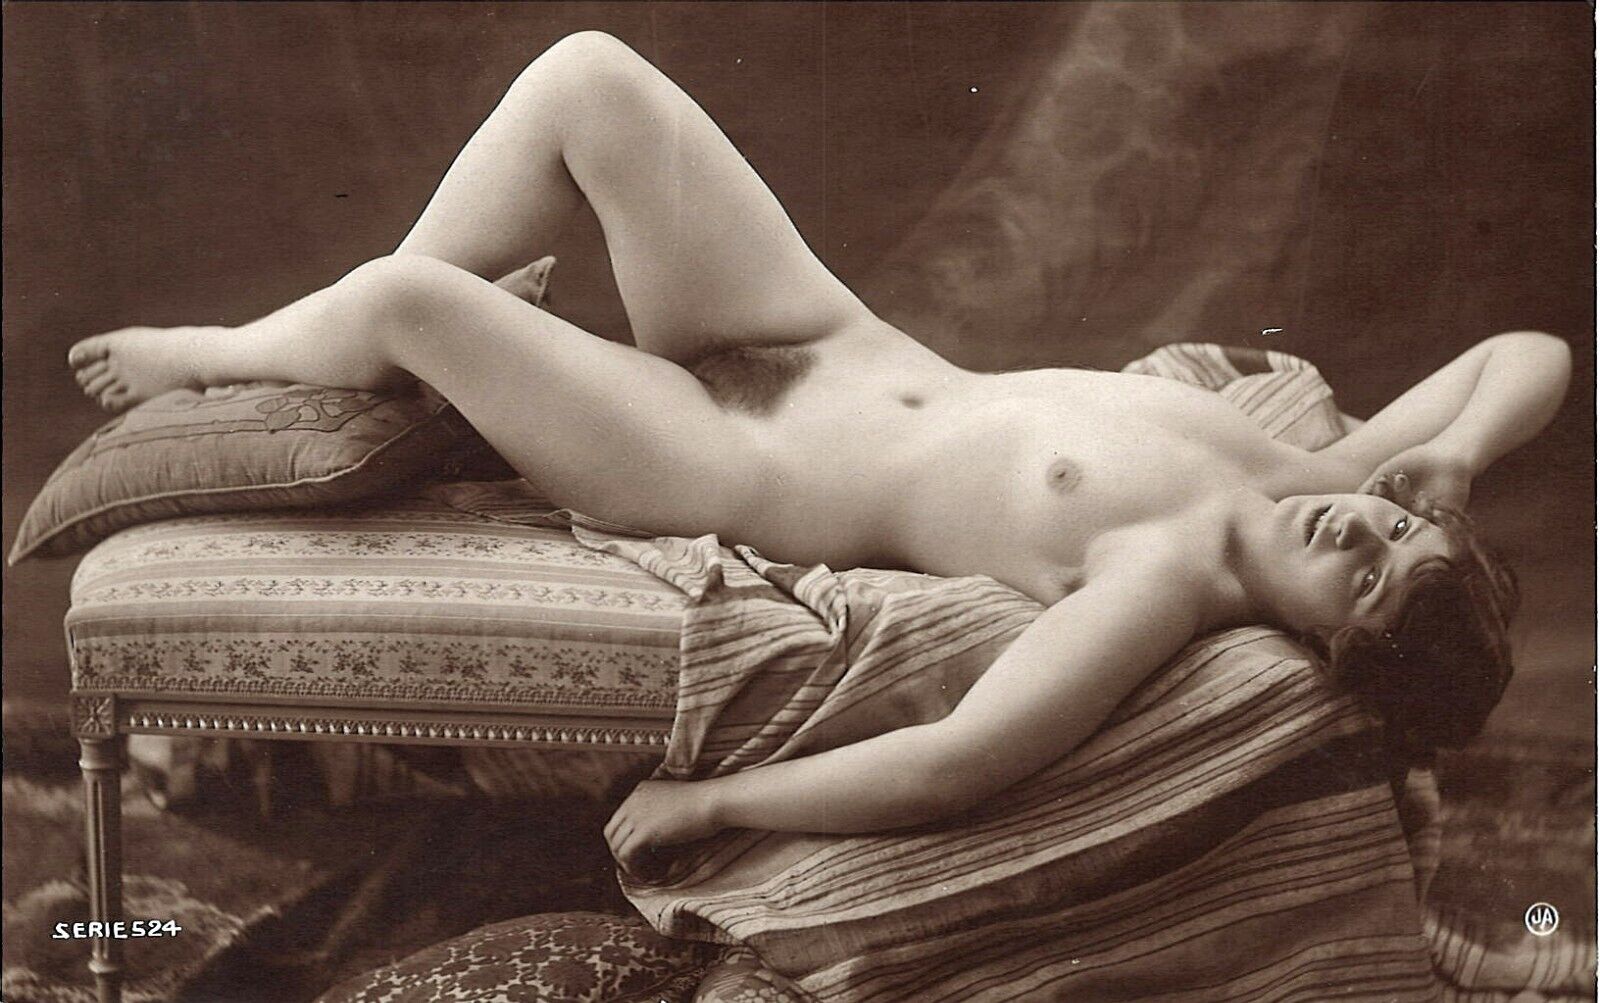 1920s french nude vintage real photo PC   J.A. Paris Series 524 (one of two)